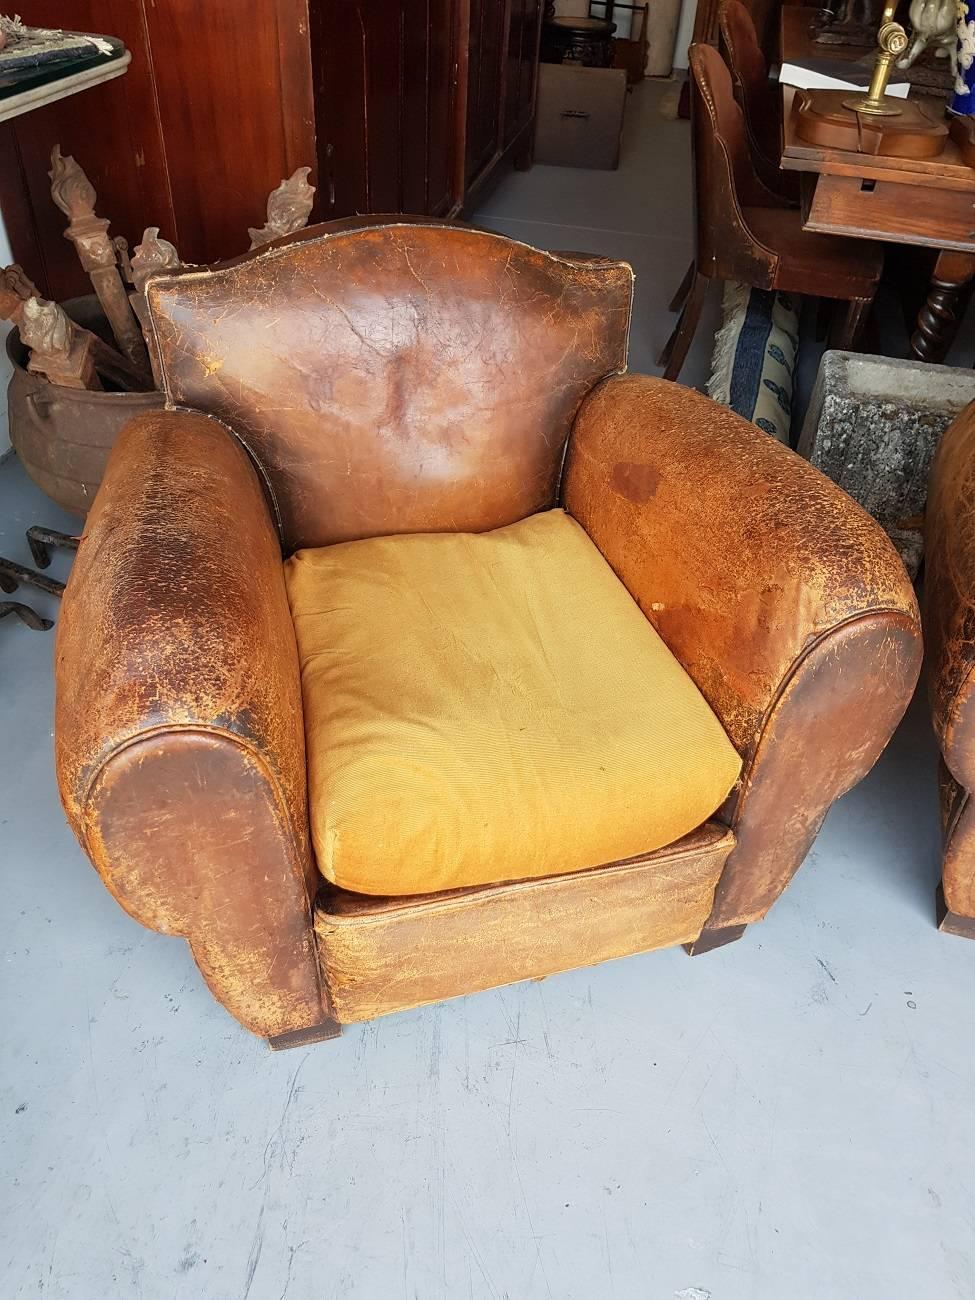 Set of two French leather club chairs from the 1930s with a fabric seat and both are in a robust condition.

The measurements are,
Depth 86 cm/ 33.8 inch.
Width 93 cm/ 36.6 inch.
Height 76 cm/ 29.9 inch.
Seat height 42 cm/ 16.5 inch.
 